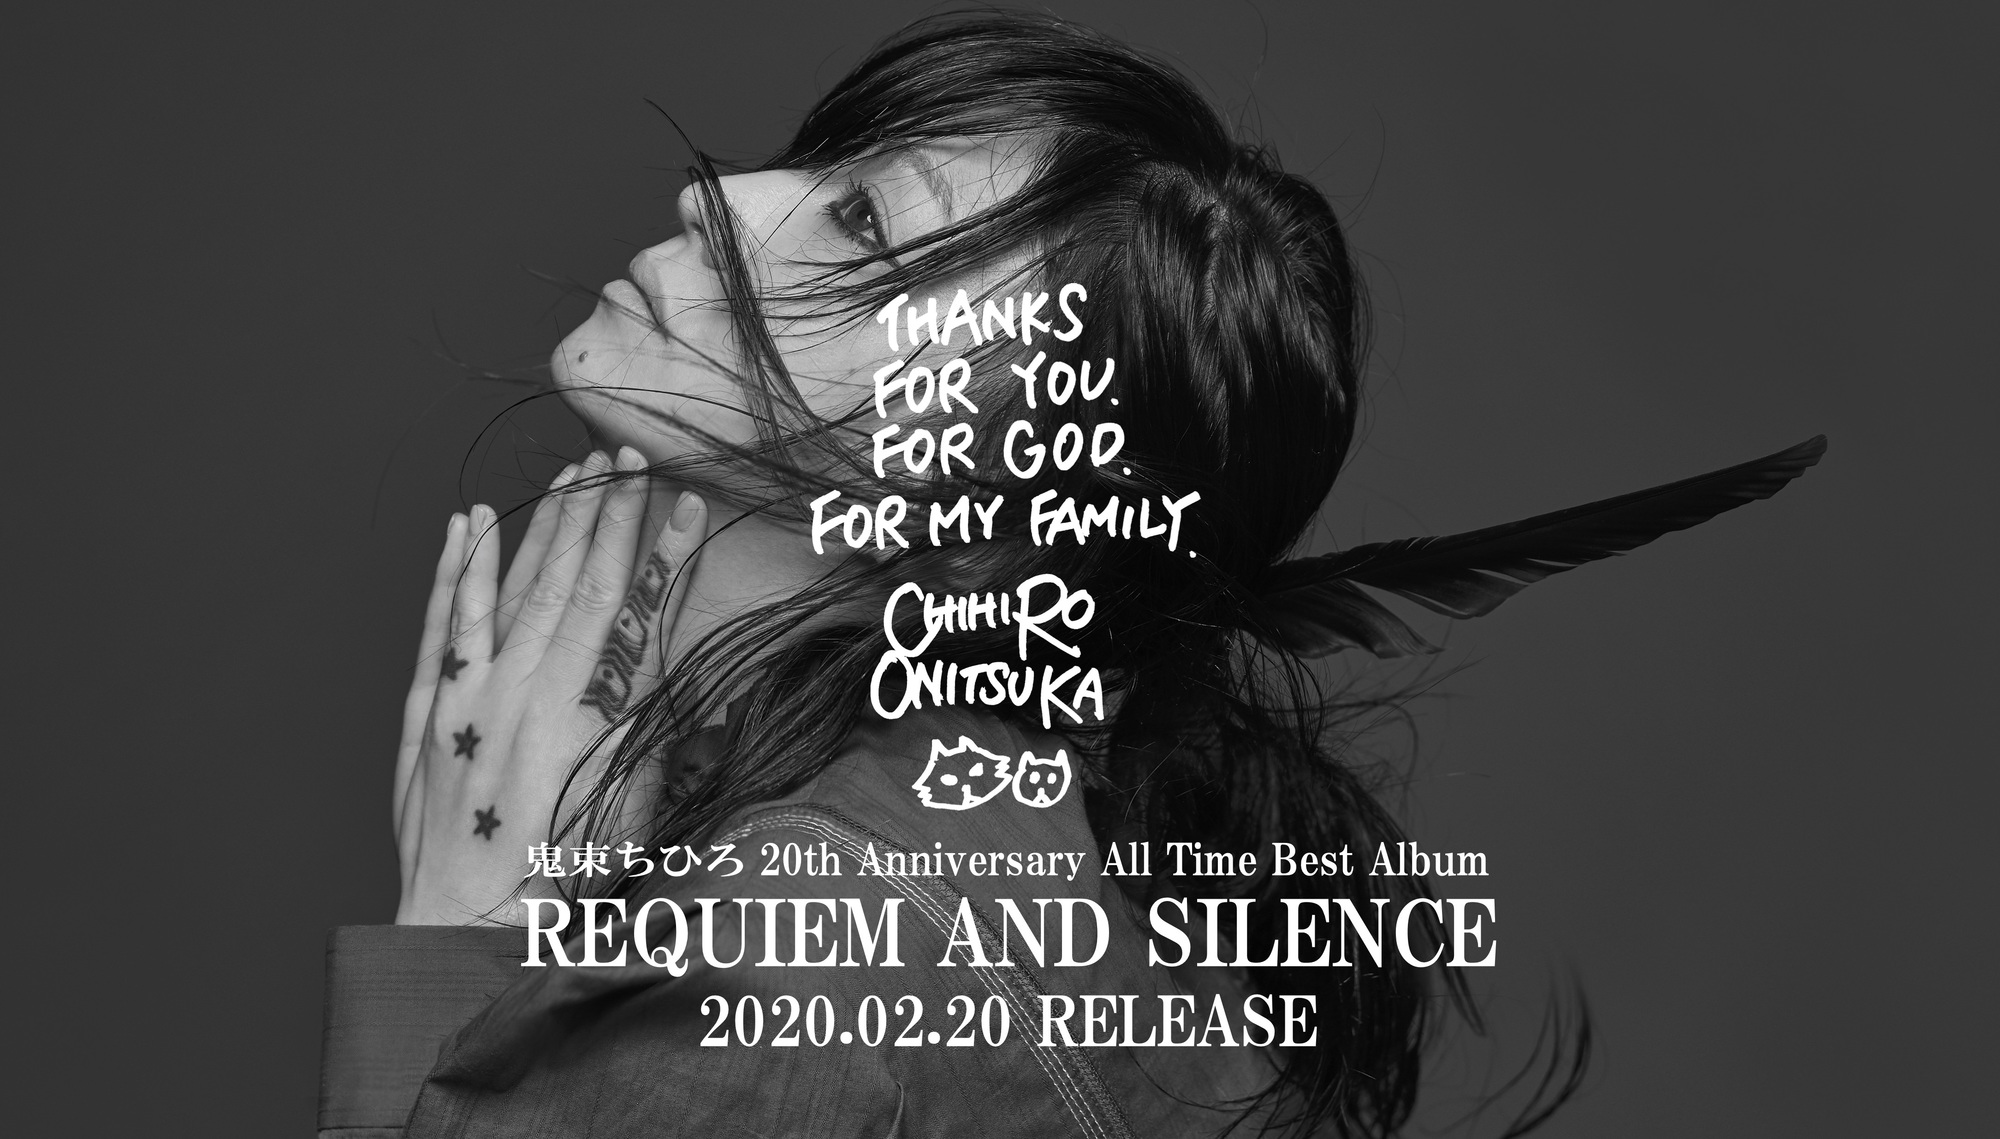 REQUIEM AND SILENCE